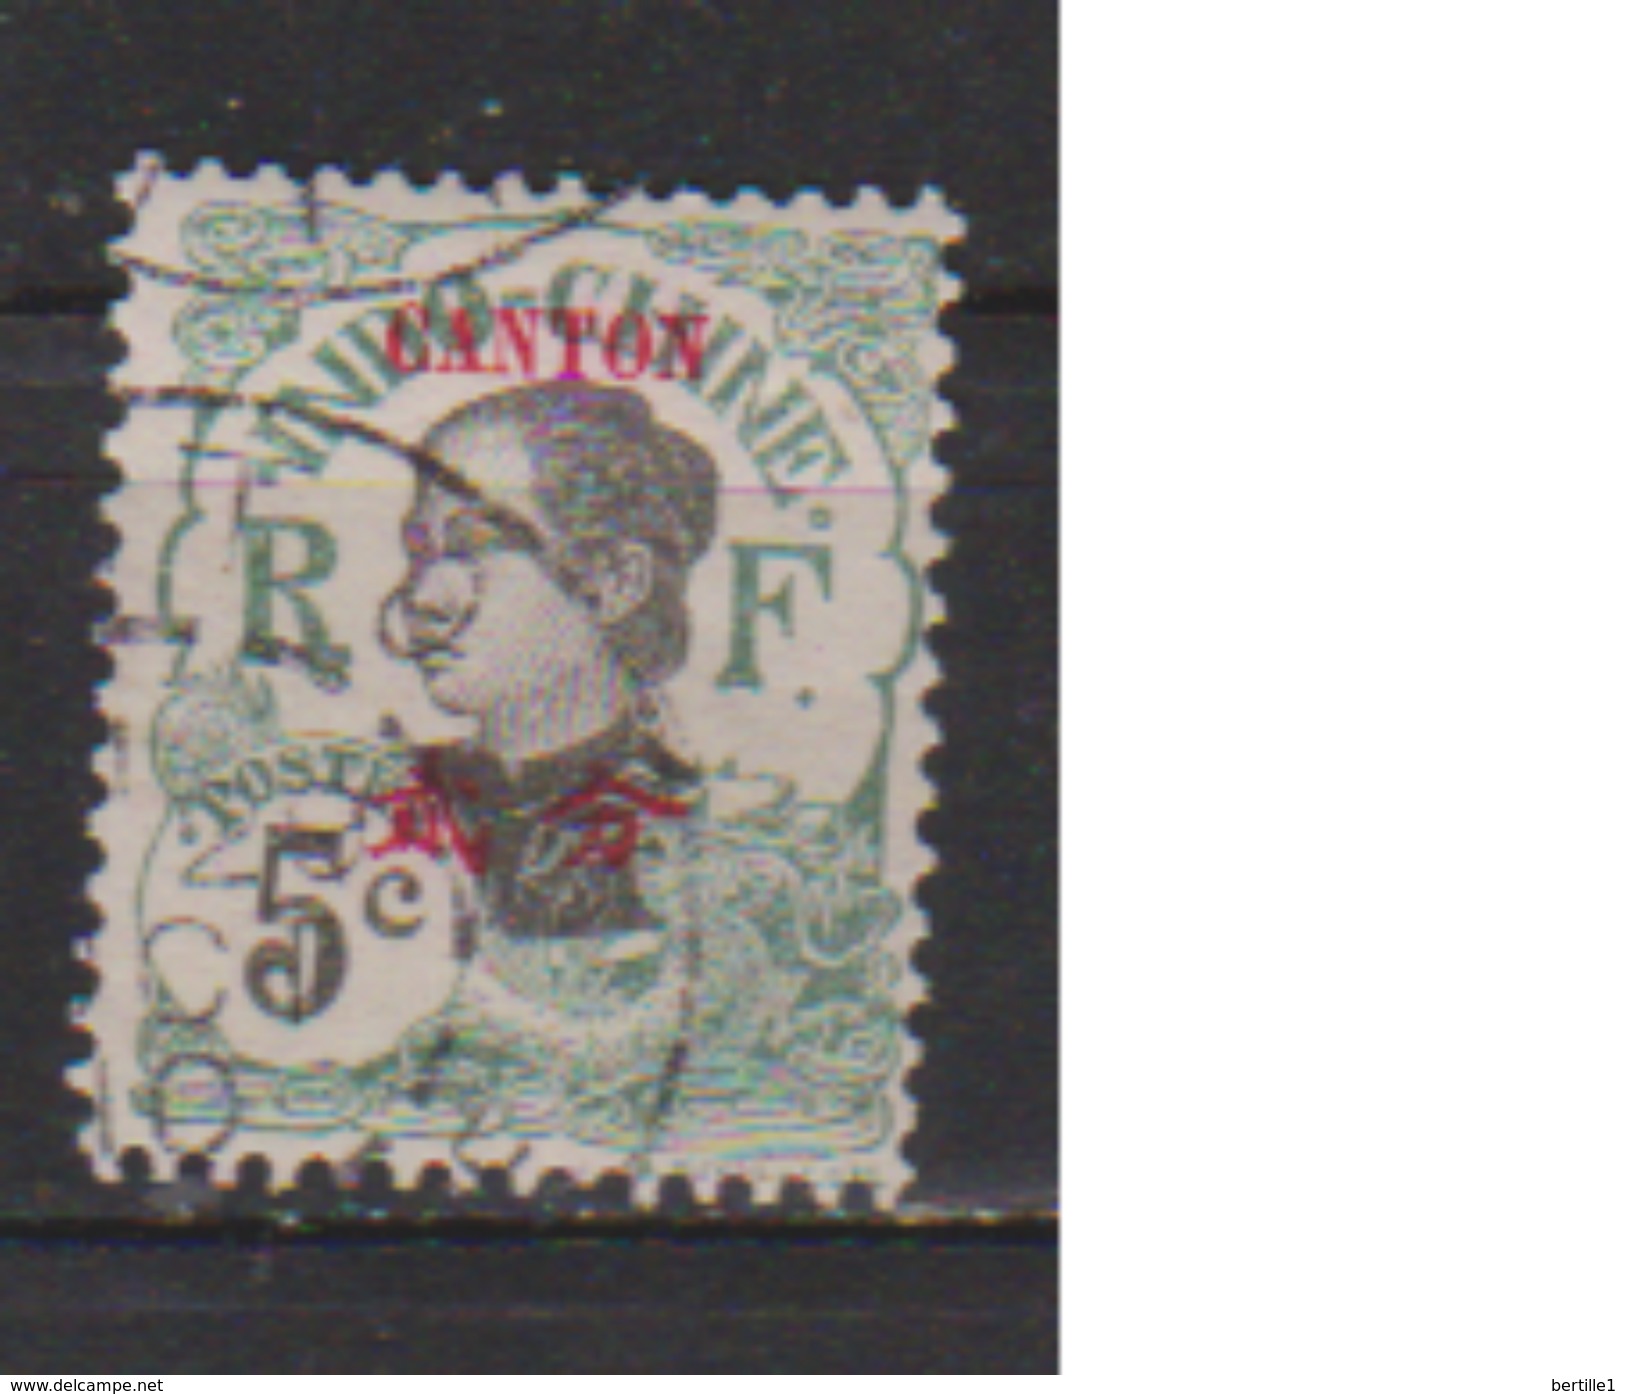 CANTON       N°     53      OBLITERE  ( O 662 ) - Used Stamps